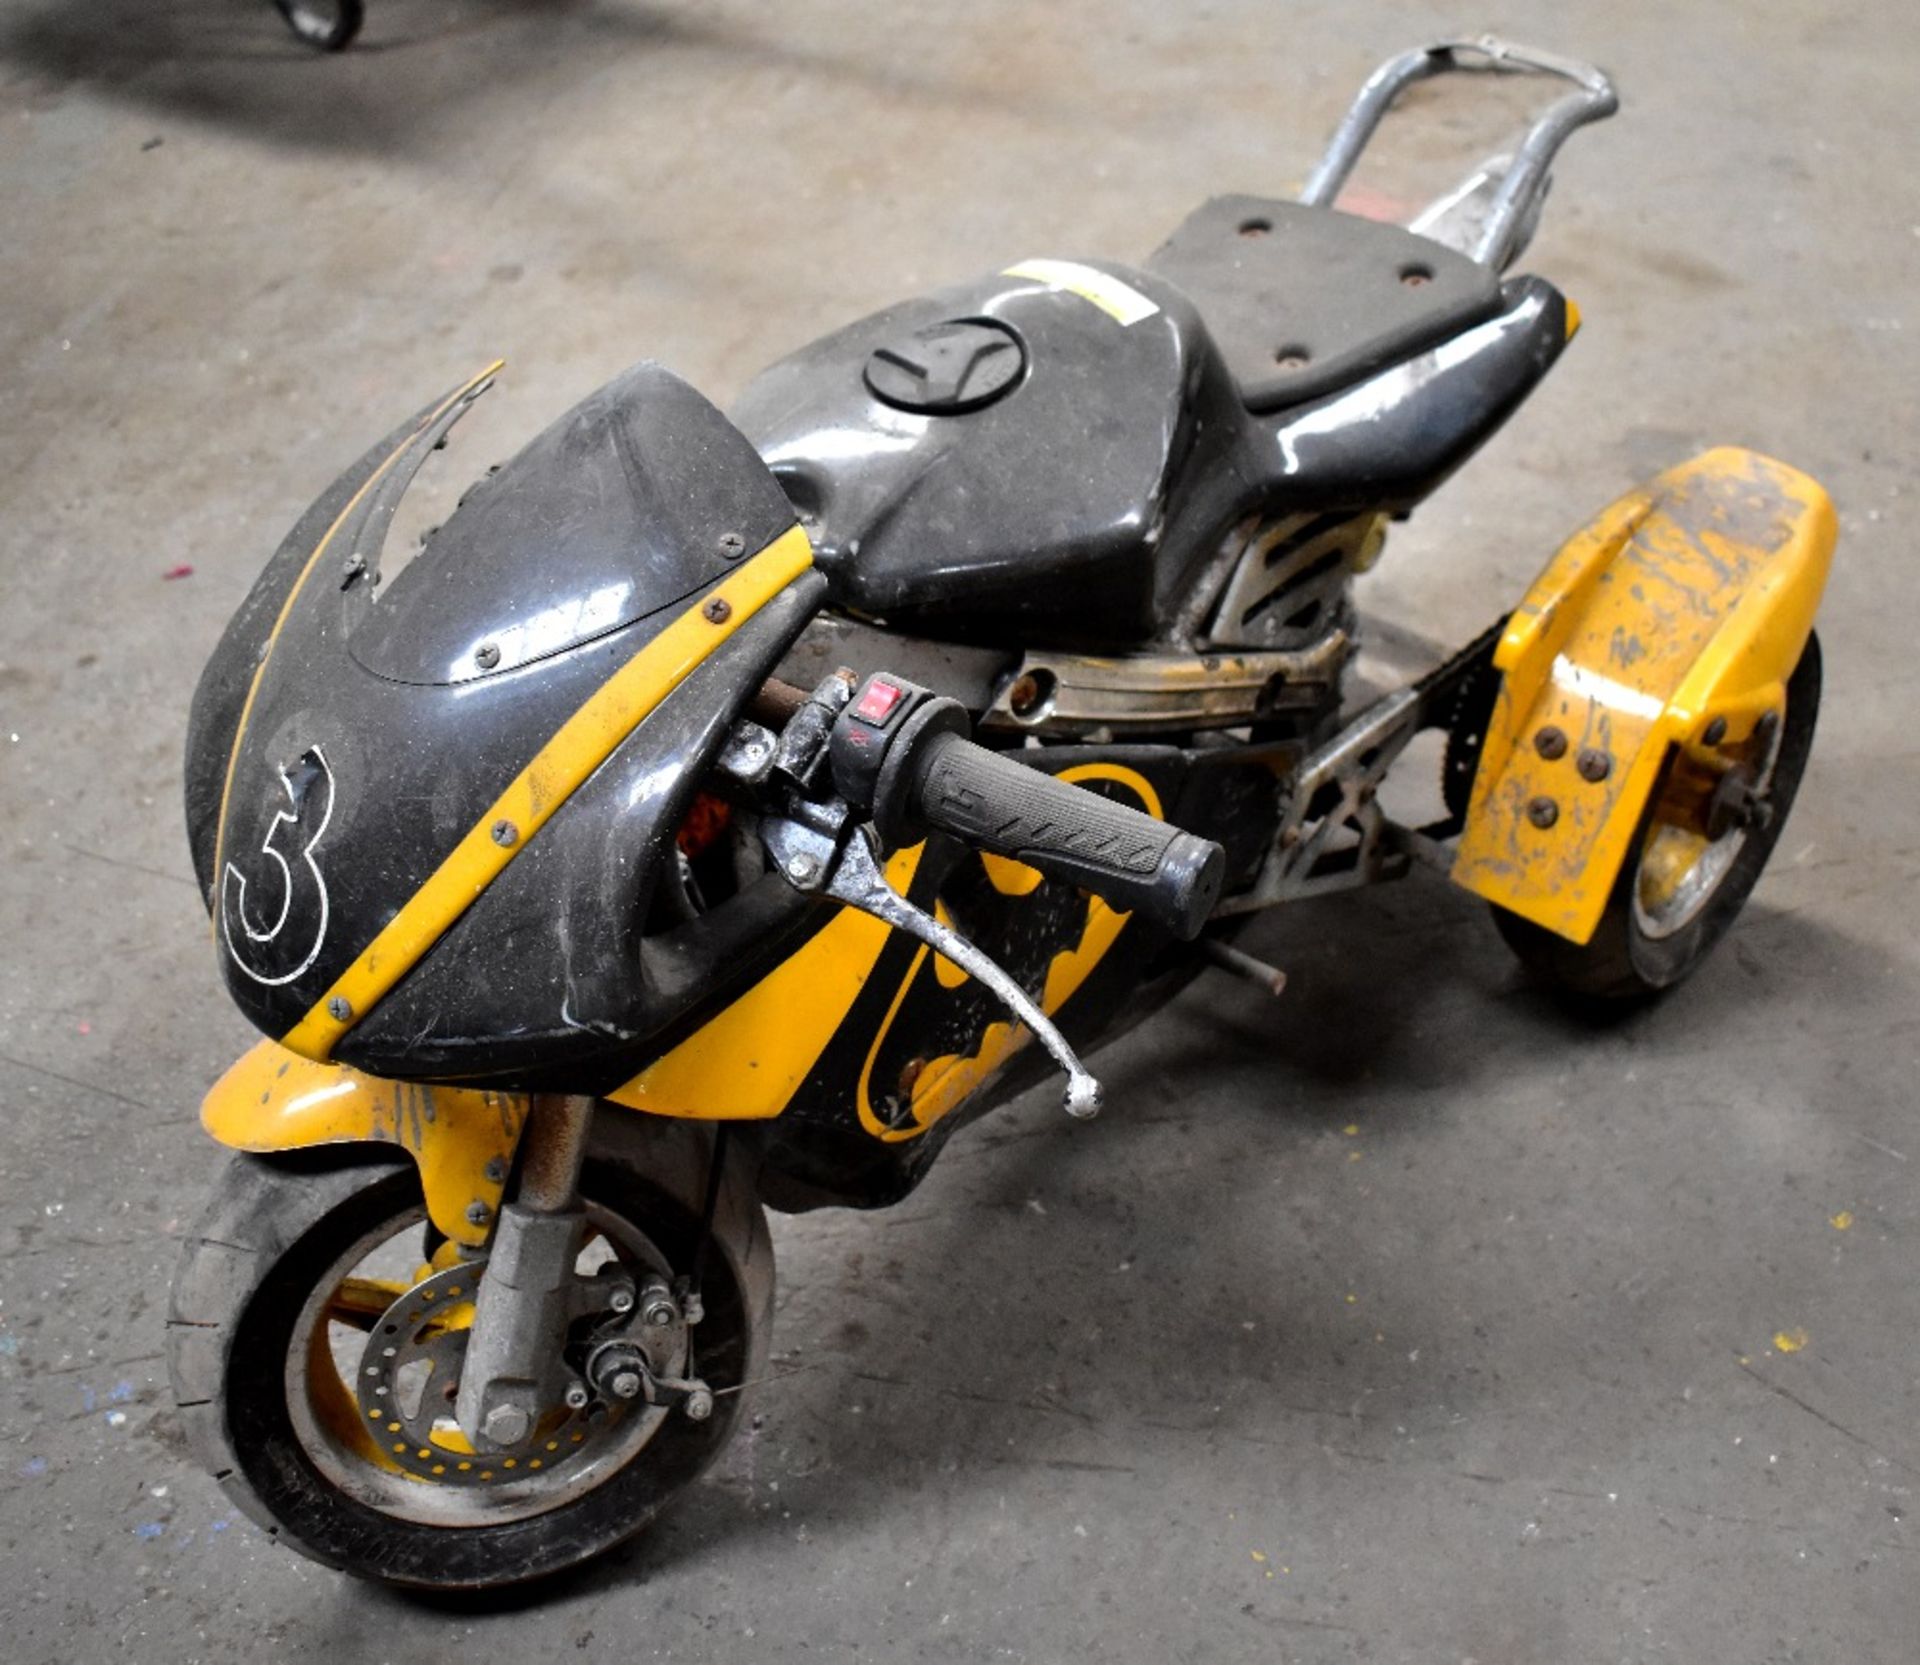 A Minimoto trike, for restoration (some aesthetic damage).